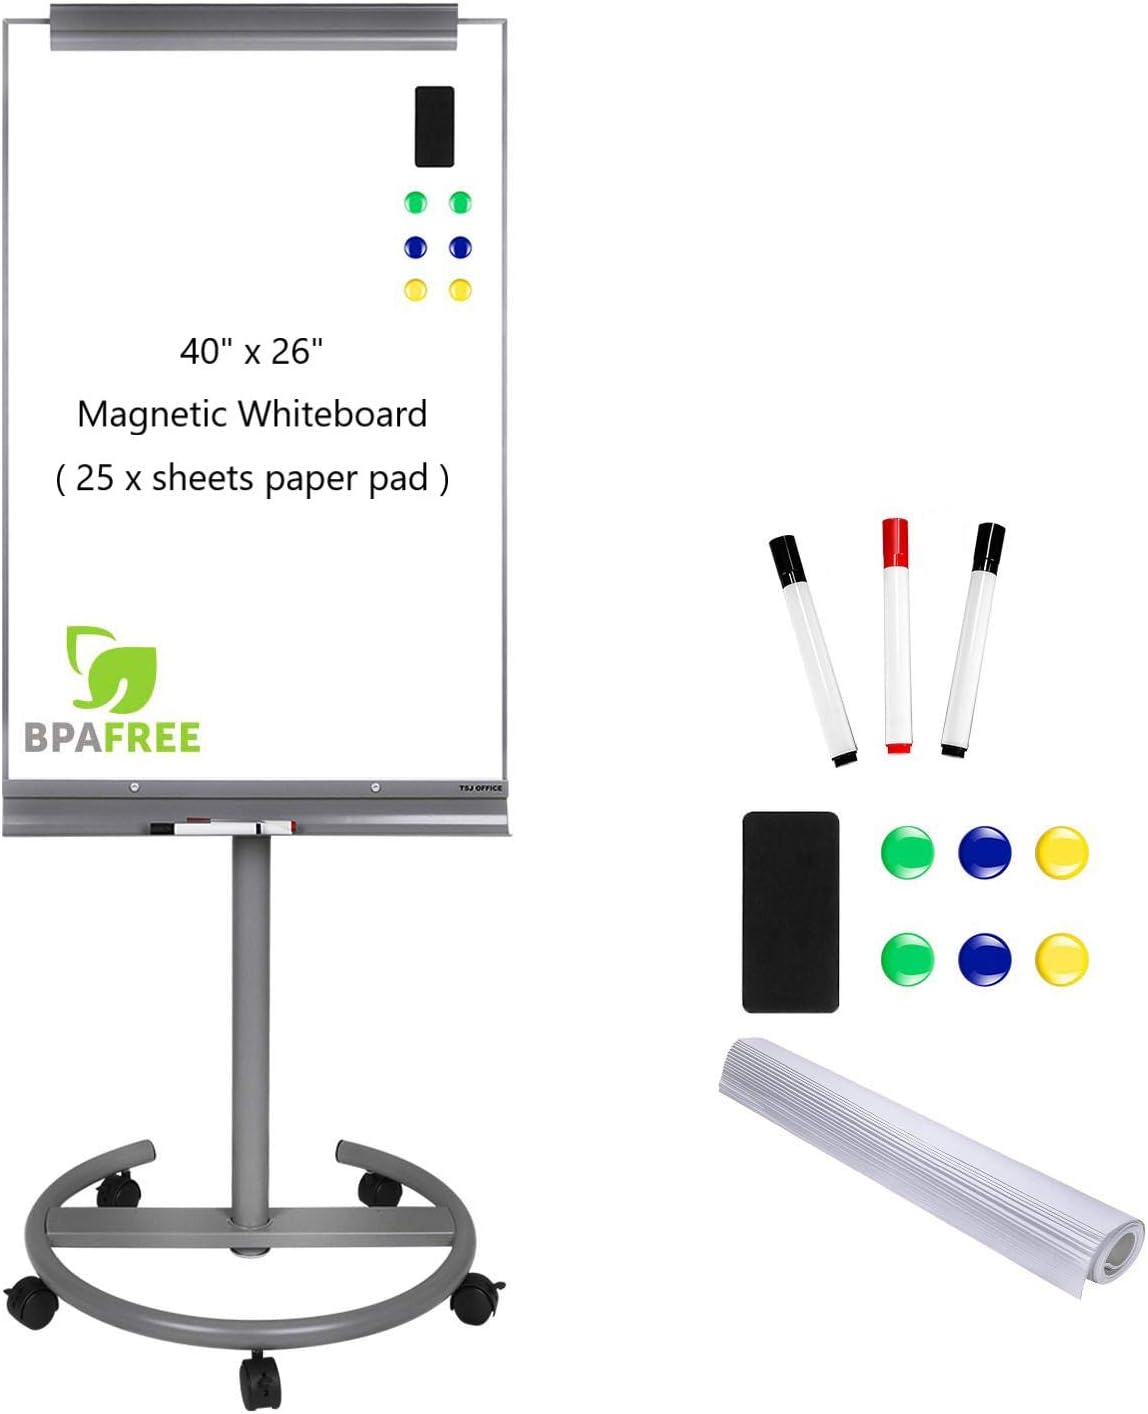 Magnetic Tripod Whiteboard Portable Dry Erase Board 36x24 inches Flipchart Easel Board Height Adjustable Easel White Board Stand White Board